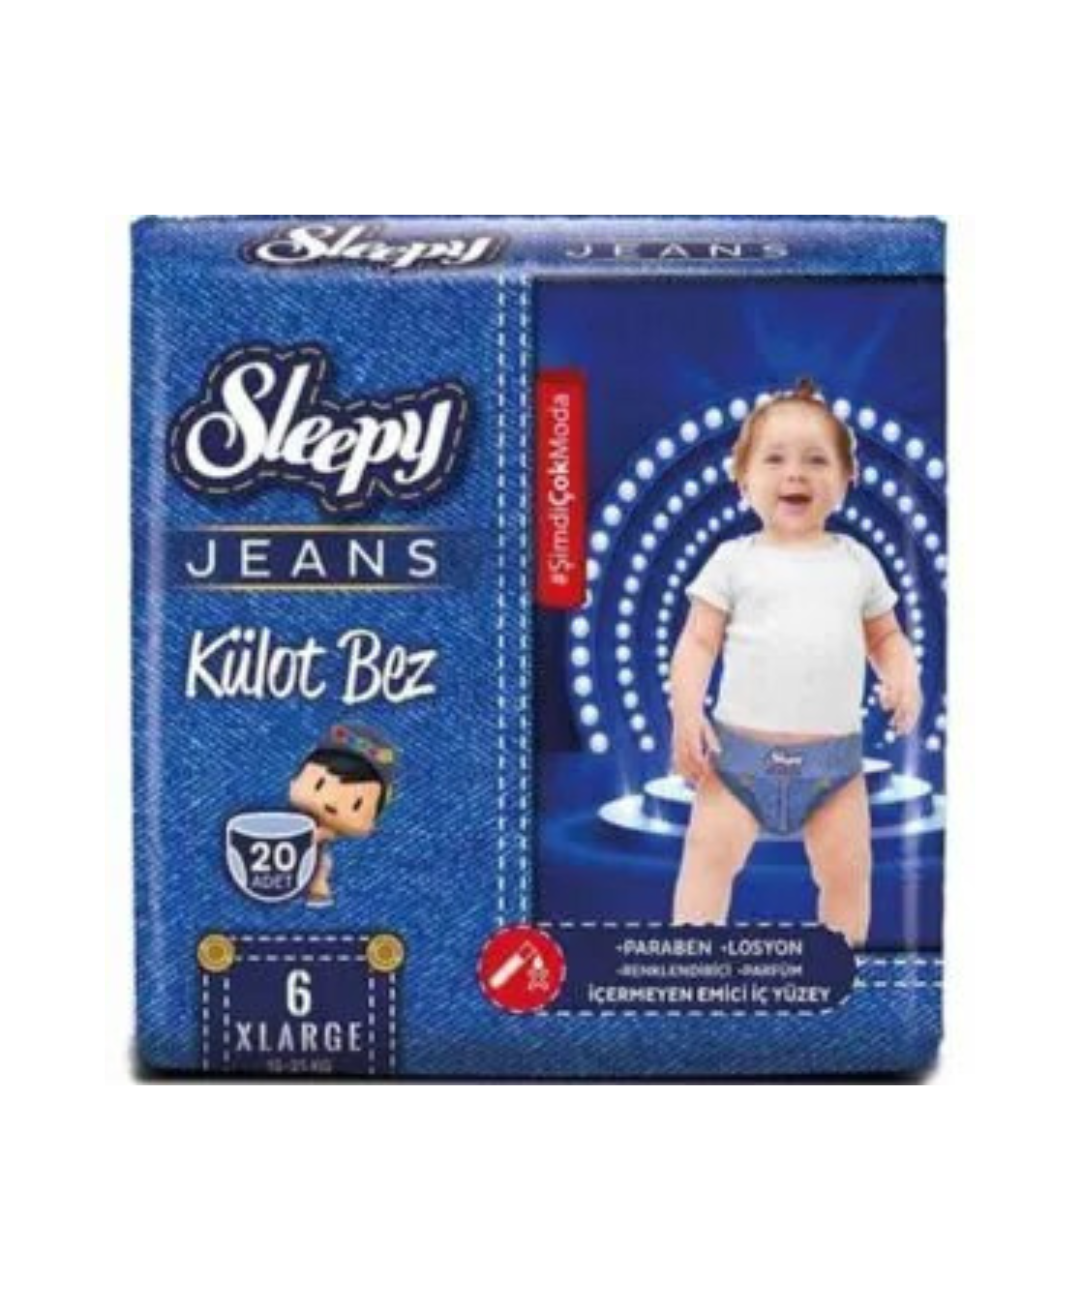 Sleepy Jeans Couche-Culotte Taille 6 XLarge (15-25 KG) - Citymall